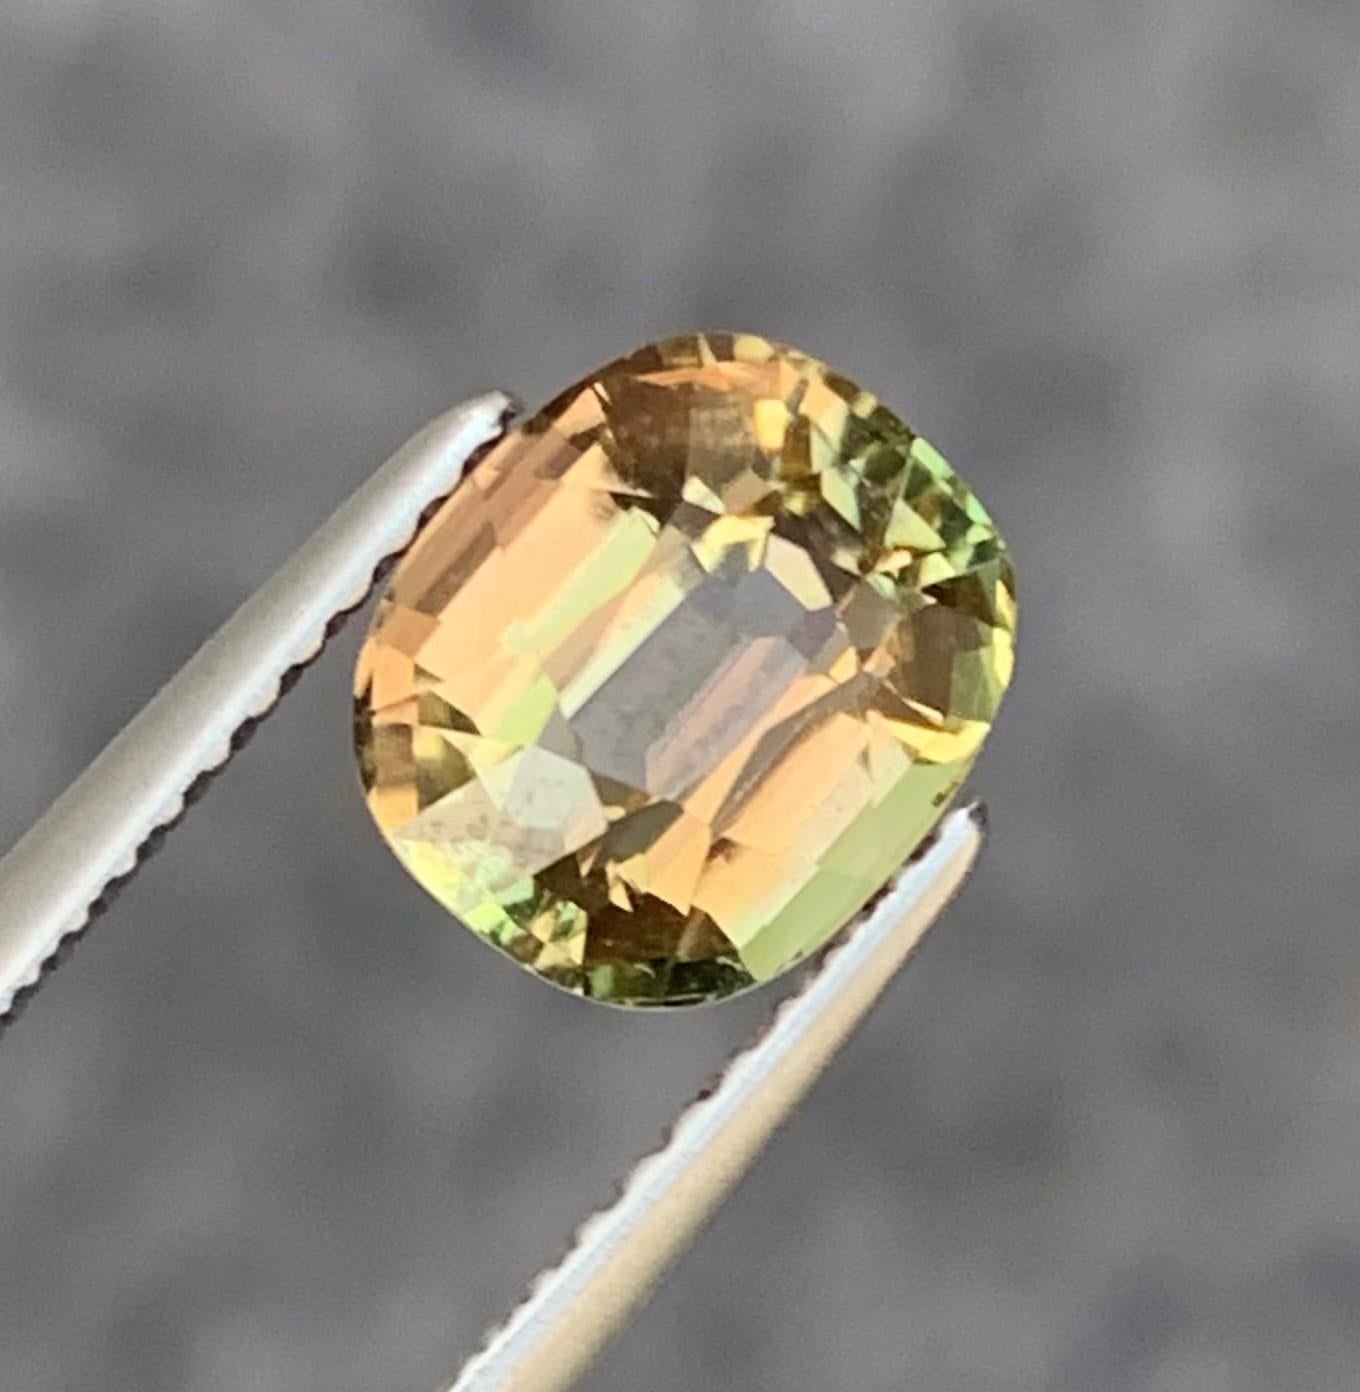 Faceted Bicolor Tourmaline
Weight: 2.30 Carats
Dimension: 7.9x6.9x6 Mm
Origin: Africa
Color: Bicolor Yellow Orange
Shape: Oval
Certificate: On Demand
Dm For Any Inquiry
.
Bicolor Tourmaline Crystal helps to treat paranoia, improve hand-eye